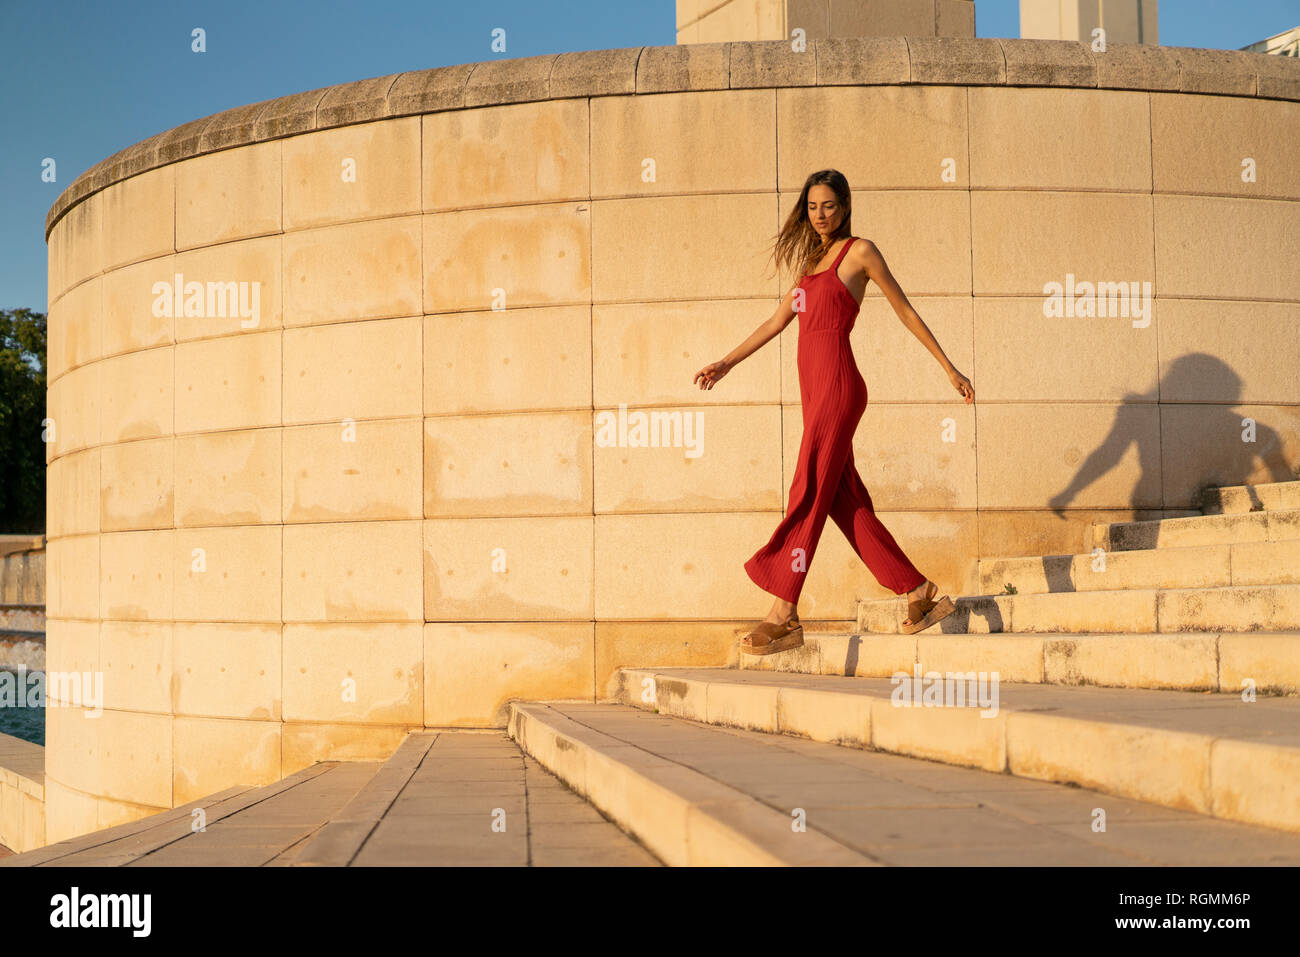 Spain, Barcelona, Montjuic, young woman wearing red jumpsuit walking on stairs Stock Photo